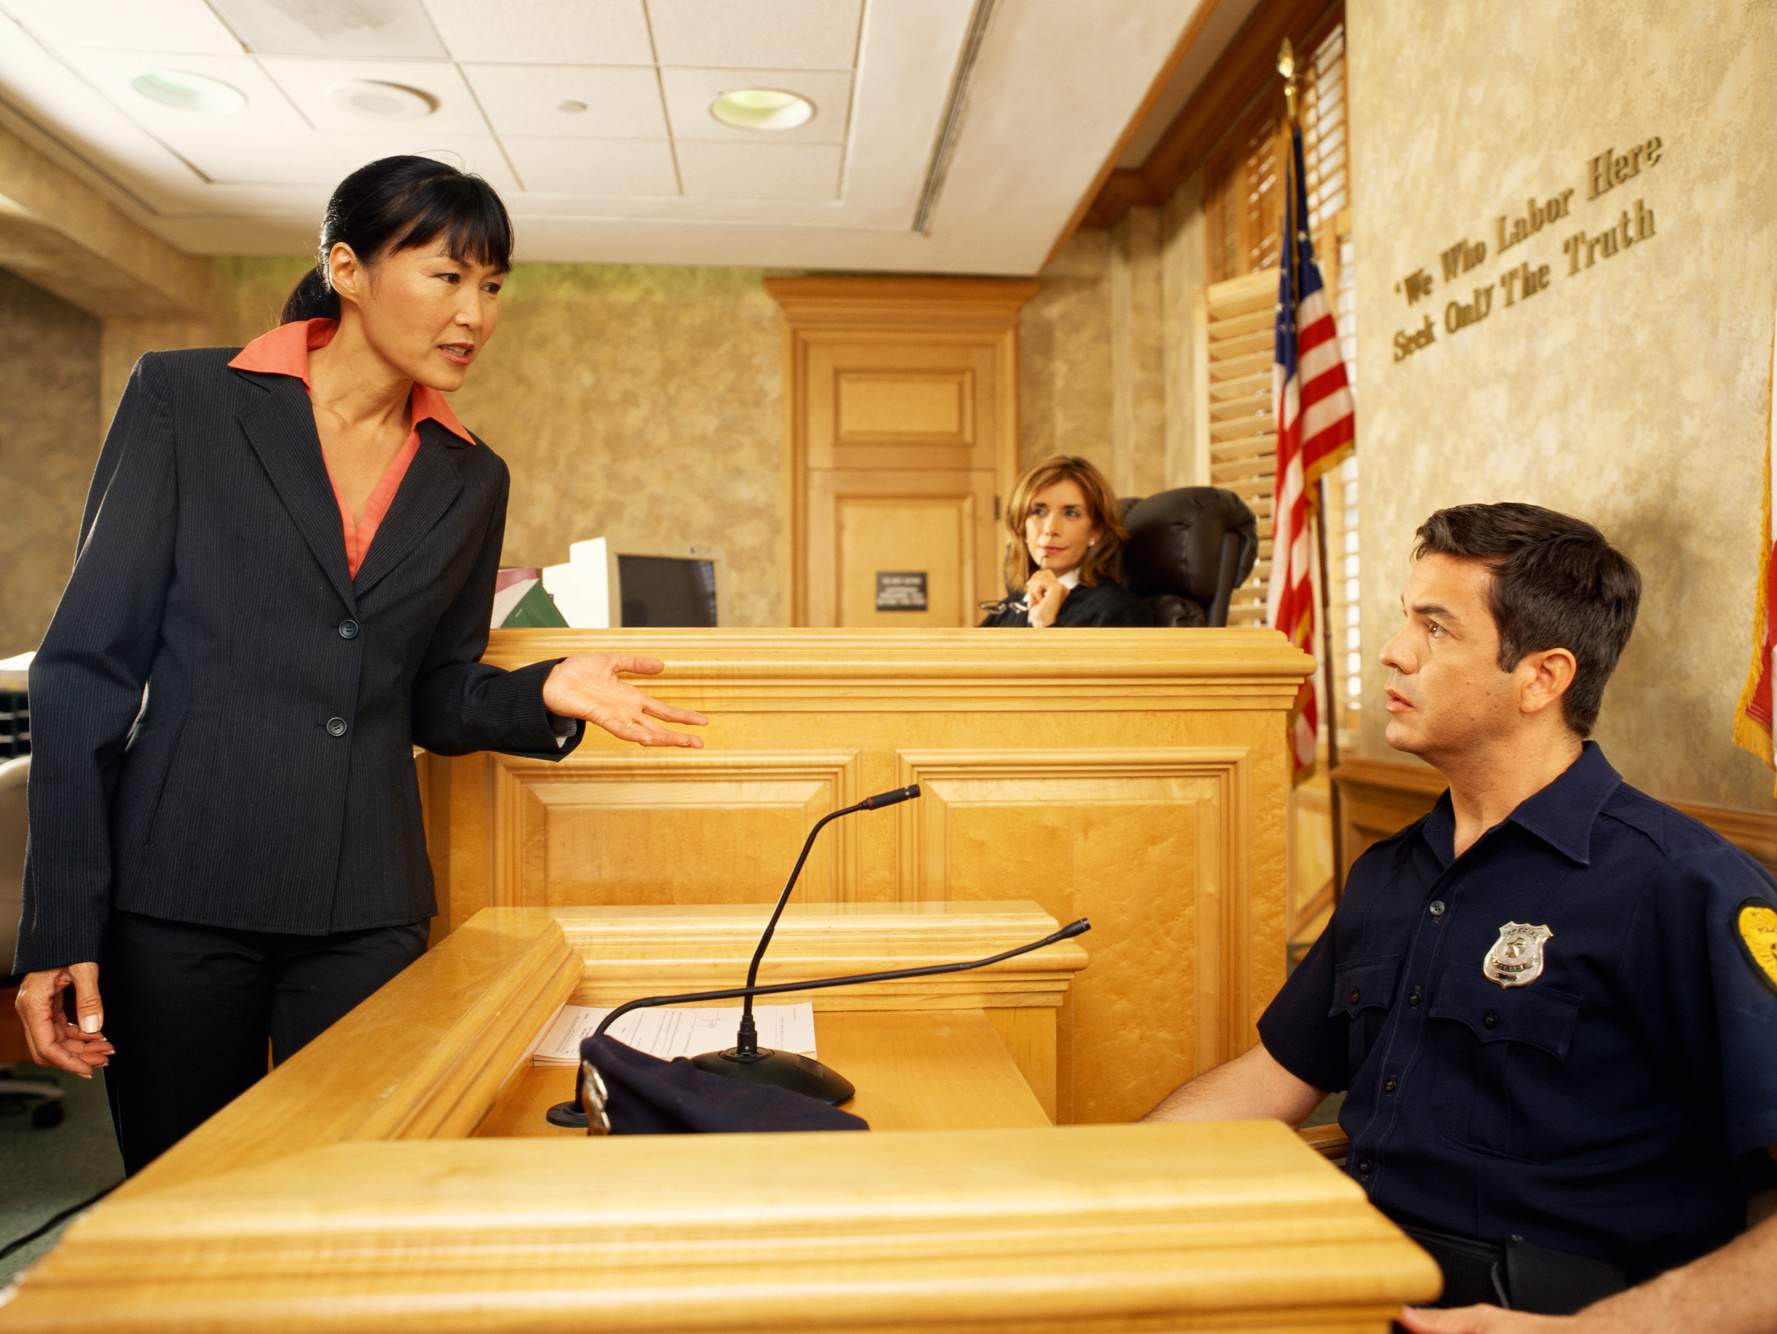 Side profile of a witness and a lawyer on the witness stand, with the judge listening